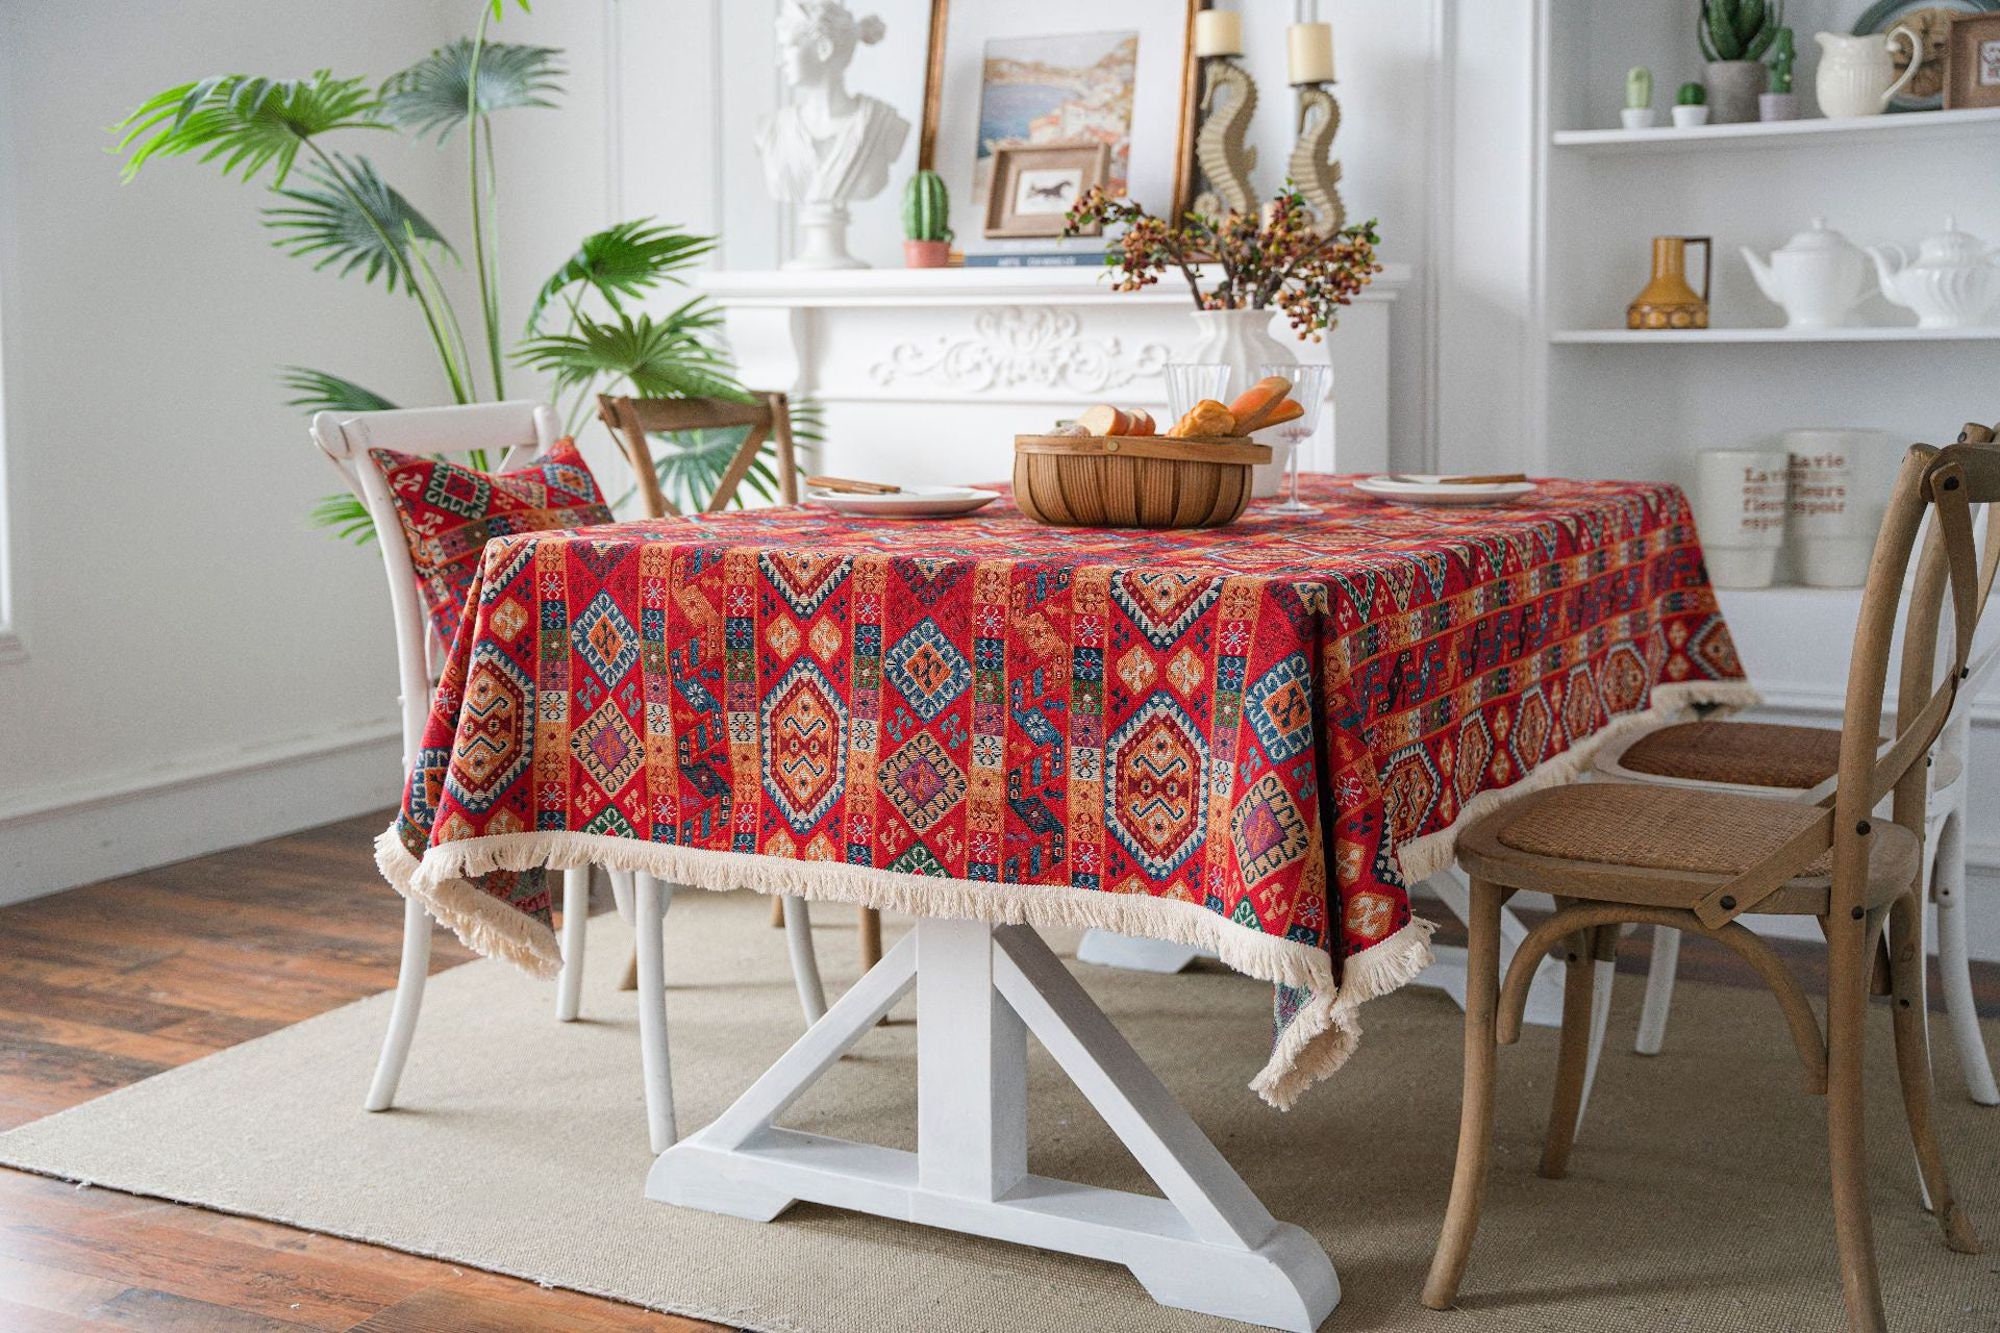 Oval Boho Tablecloth for Oval Table Covers, Wrinkle Free Bohemian Style  Design Table Cloth for Dining Room, Tabletop Decoration , 60 x 102  Inch(Retro